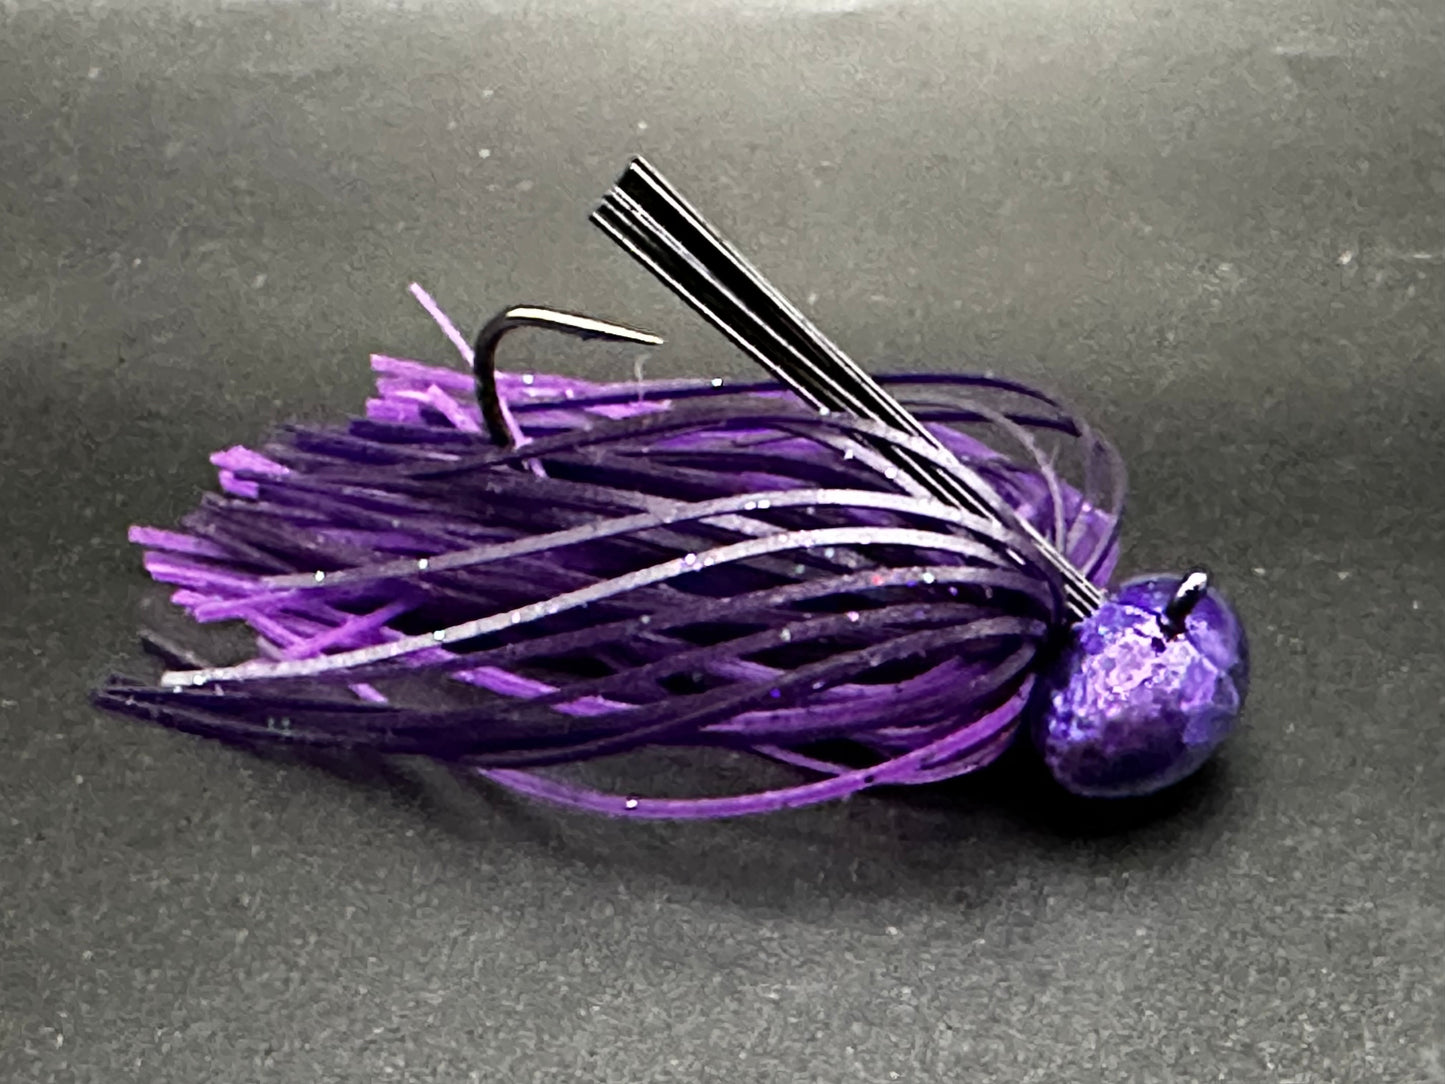 Football Jig - 1 Jig wire tied by hand